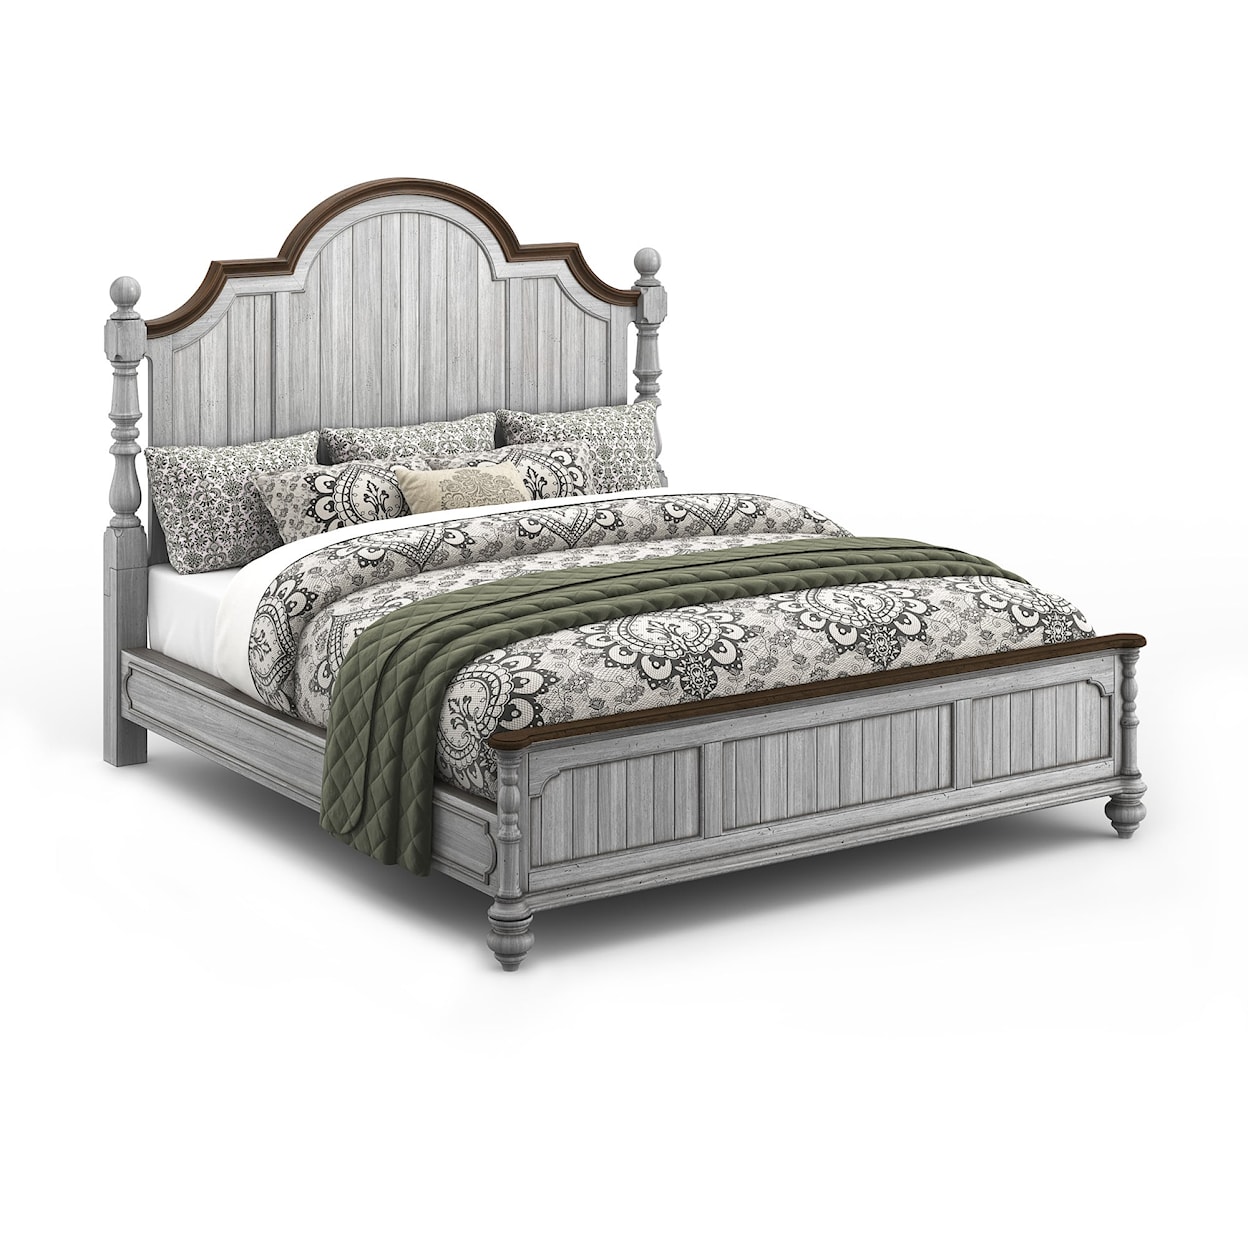 Flexsteel Casegoods Plymouth Cal King Poster Bed